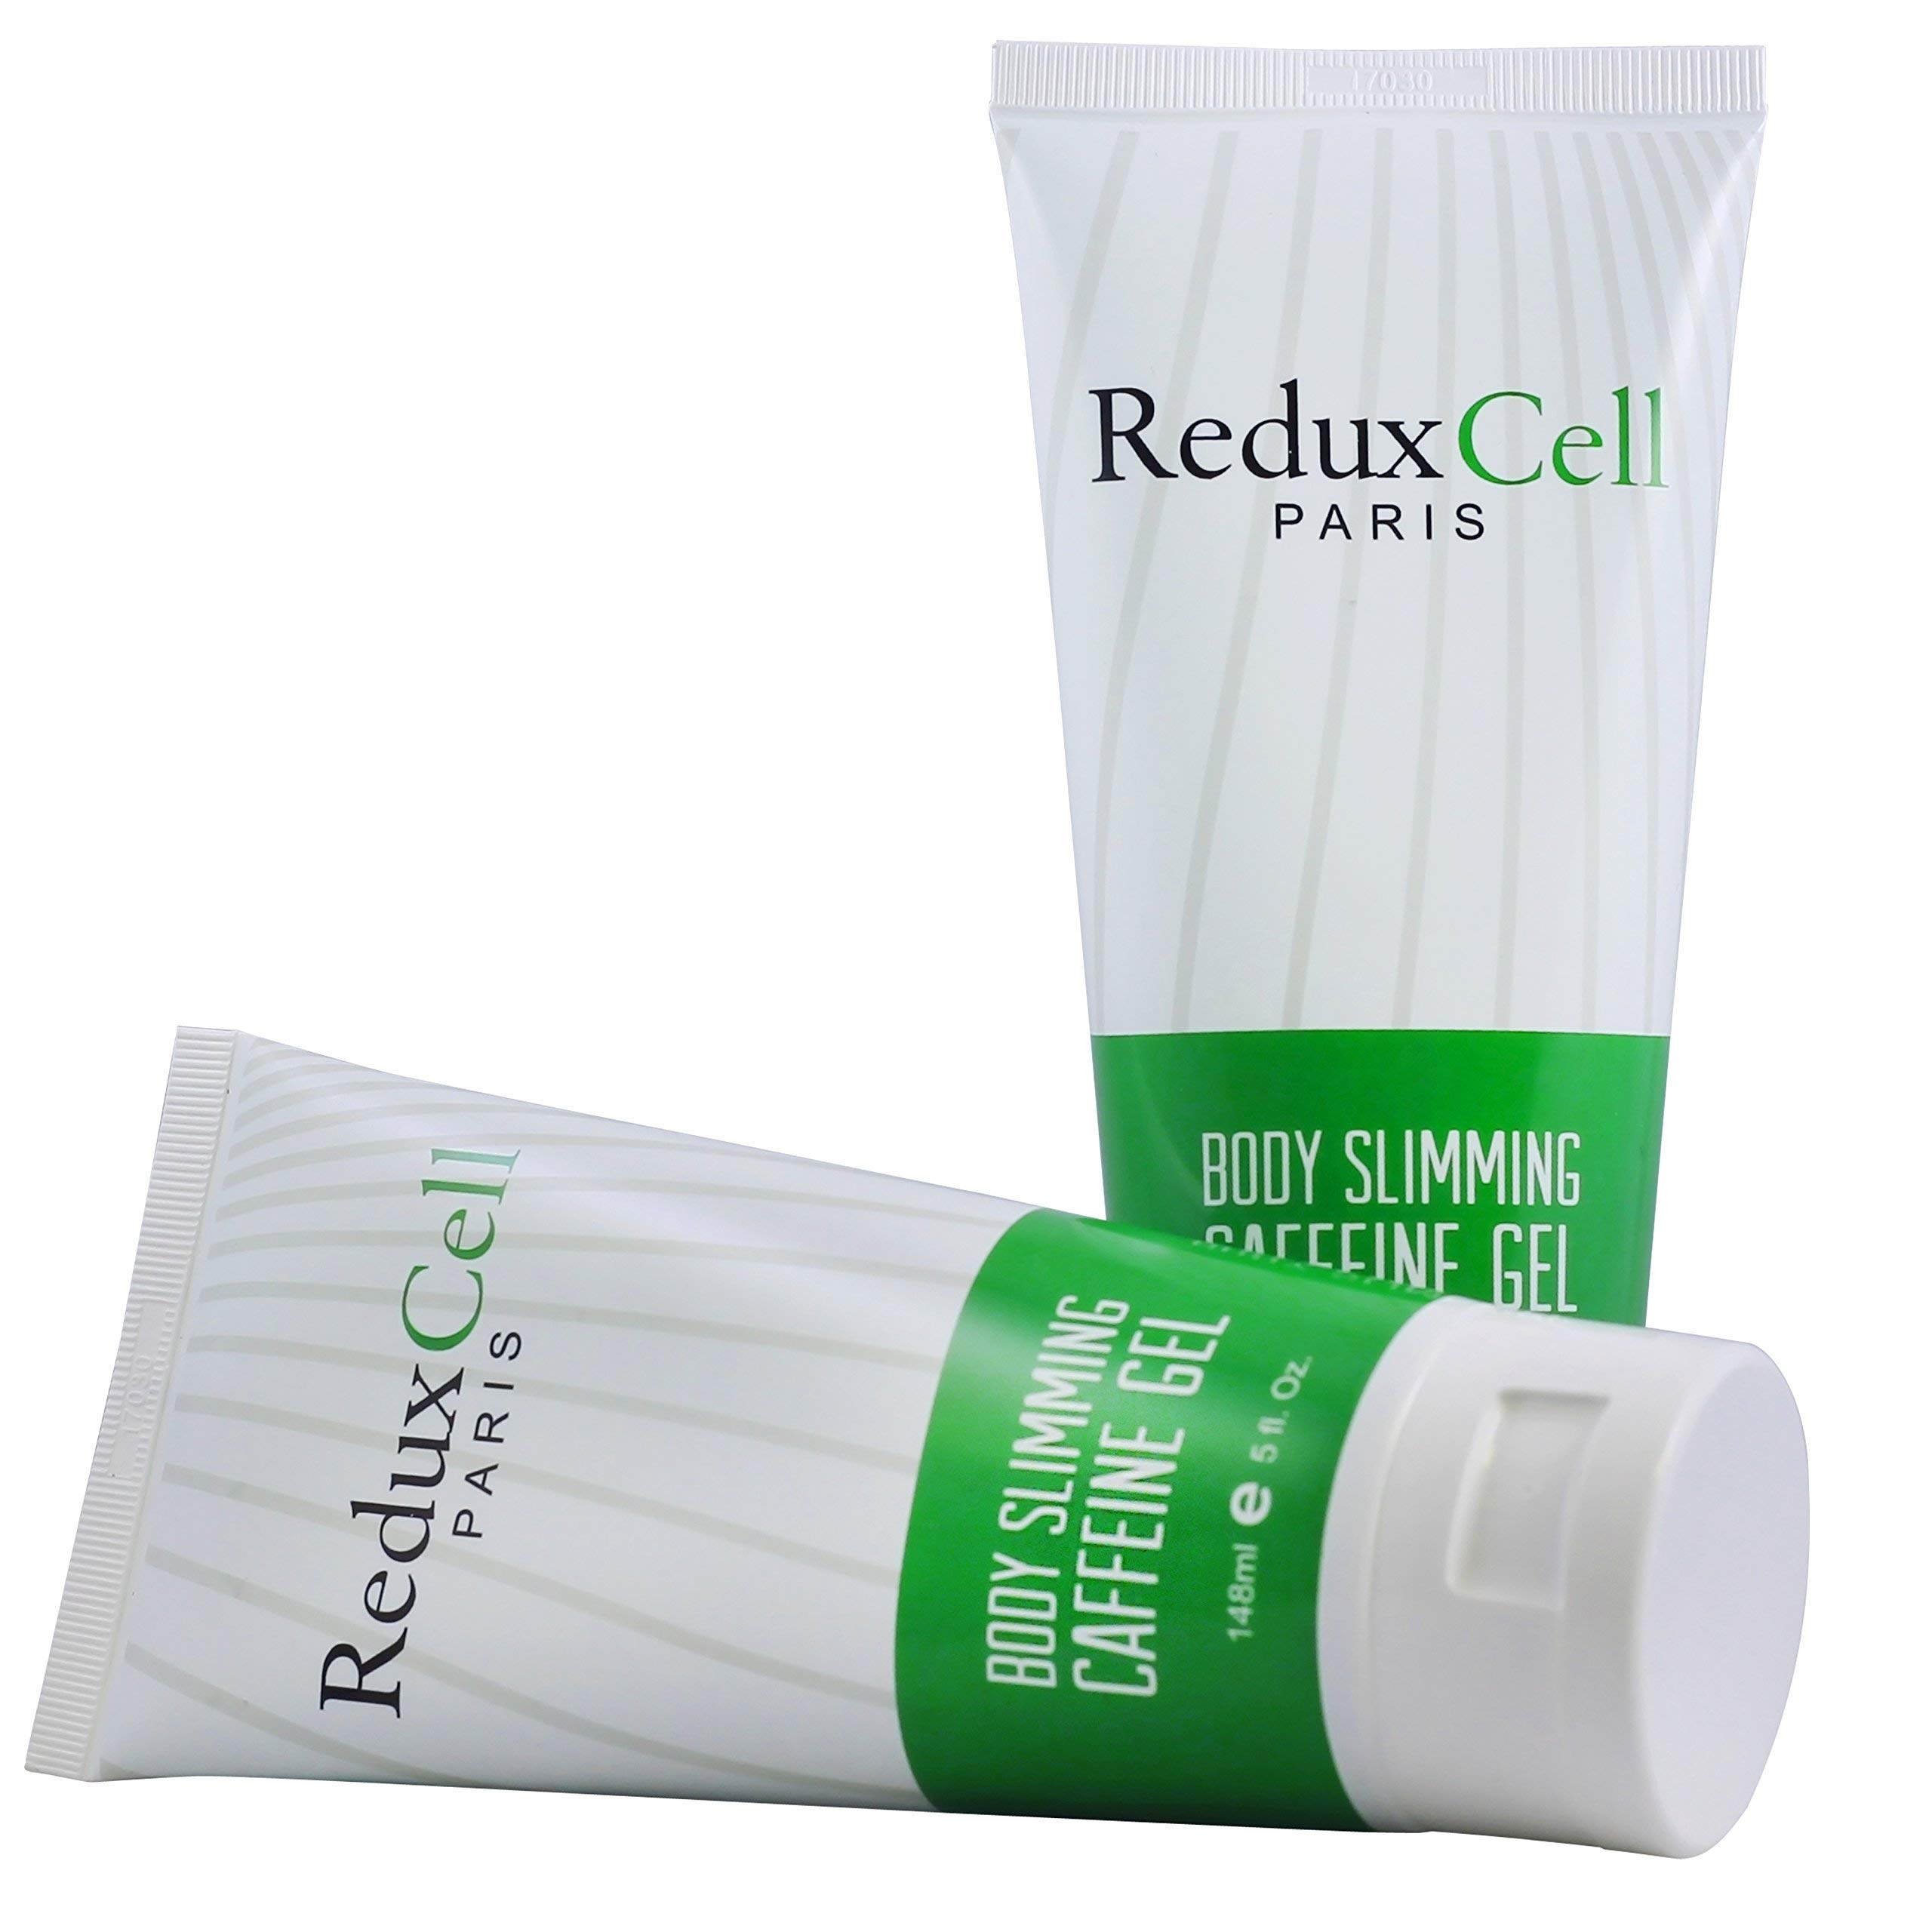 Reduxcell Fat Burning Cream for Belly - Anti Cellulite Firming Cream with Coenzyme Q10 and Caffeine - Body Slimming Cream - Burn Fat 3X Faster with Stomach Fat Burner Cream - Tummy Tightening Formula